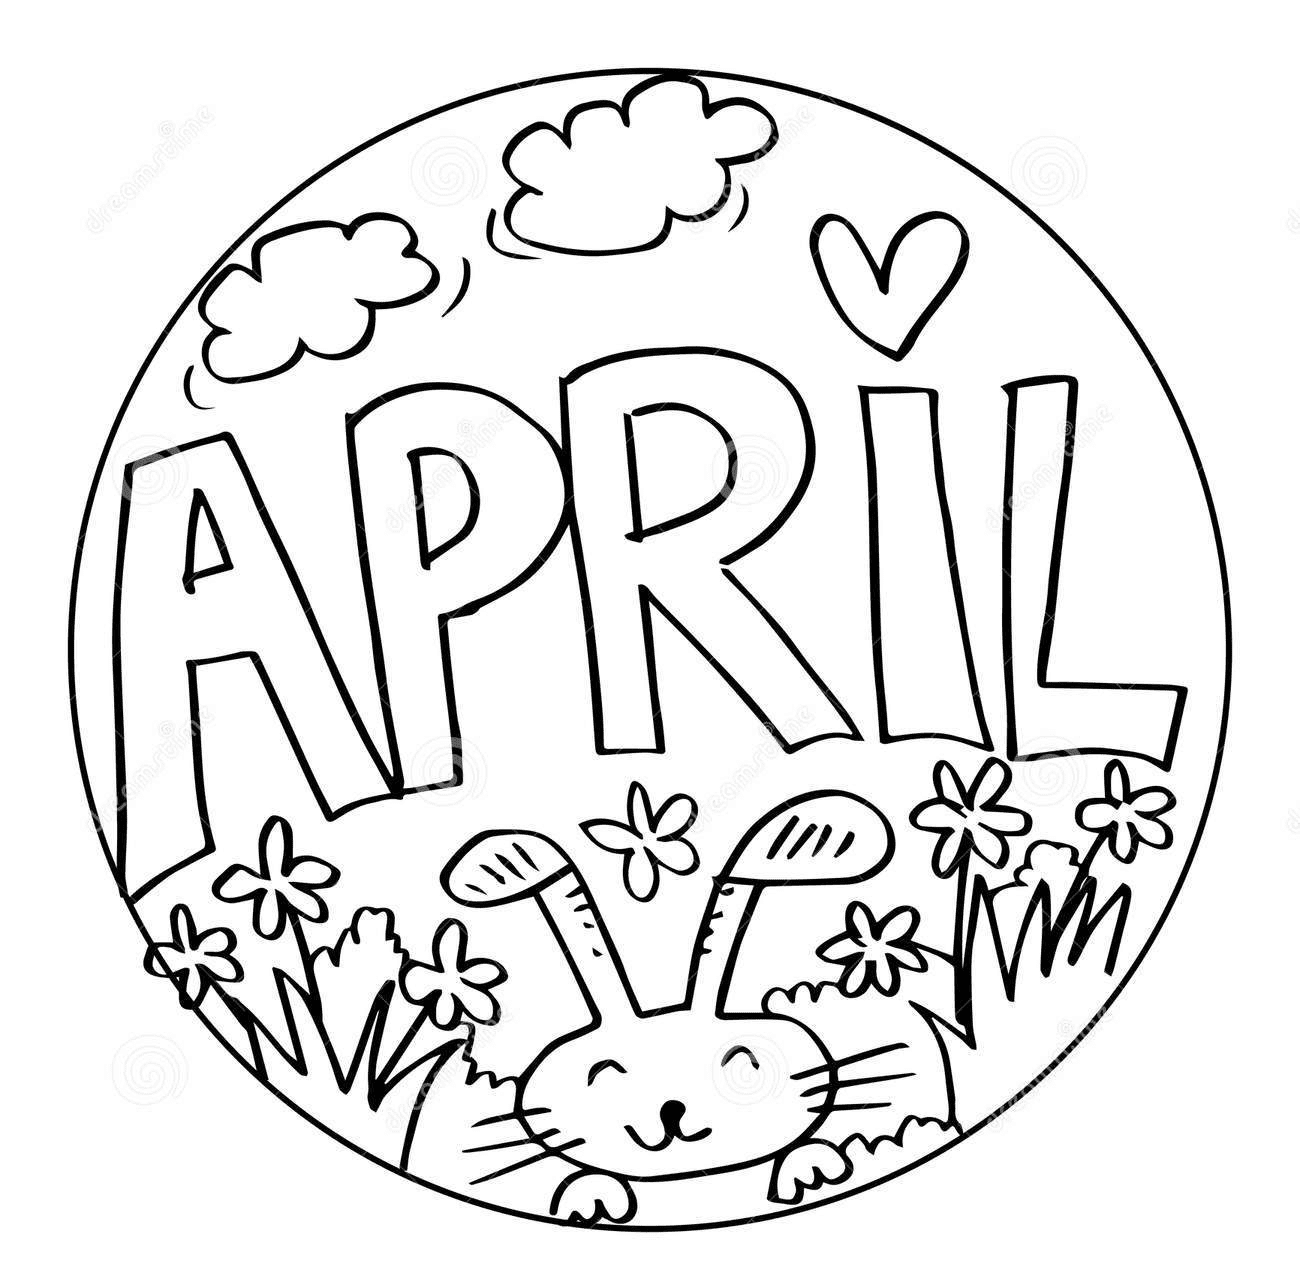 April for Kids Coloring Pages